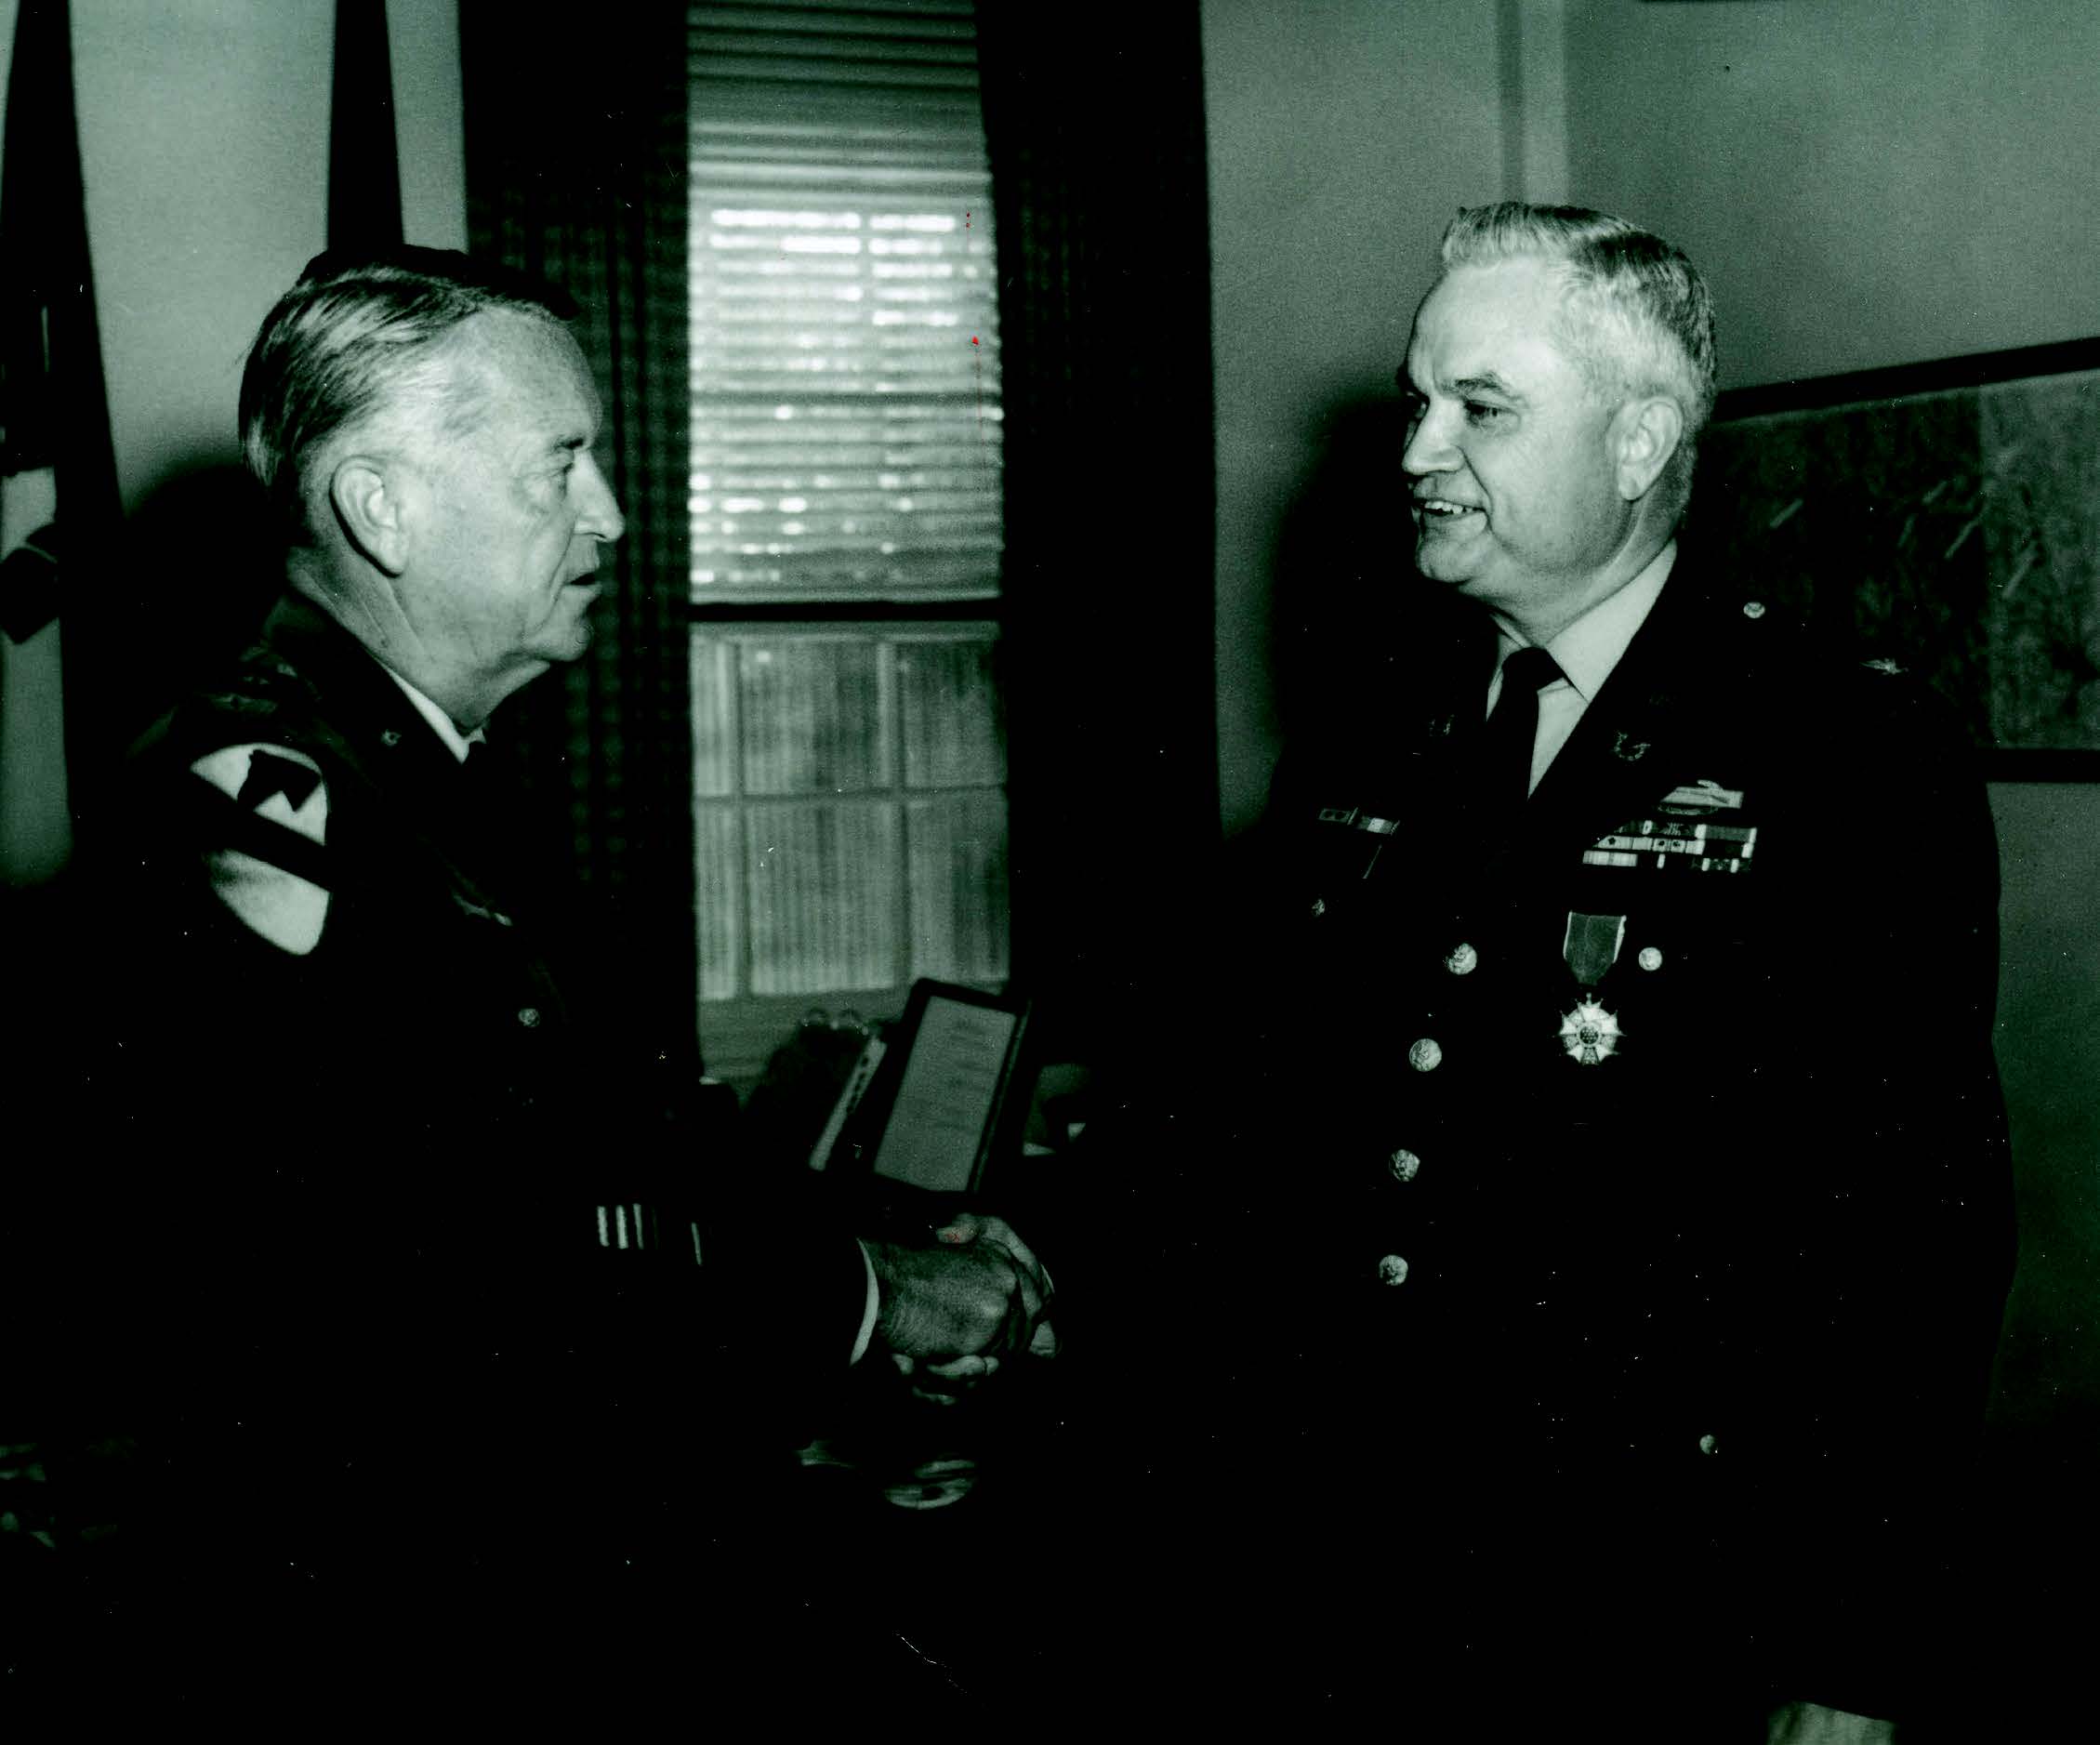 LTG John J. Tolson (left), Commanding General, XVIII Airborne Corps and Fort Bragg, congratulates COL Cecil L. Forinash (right) after presenting him with the Legion of Merit upon his retirement, 31 October 1969. (Photo courtesy of author)